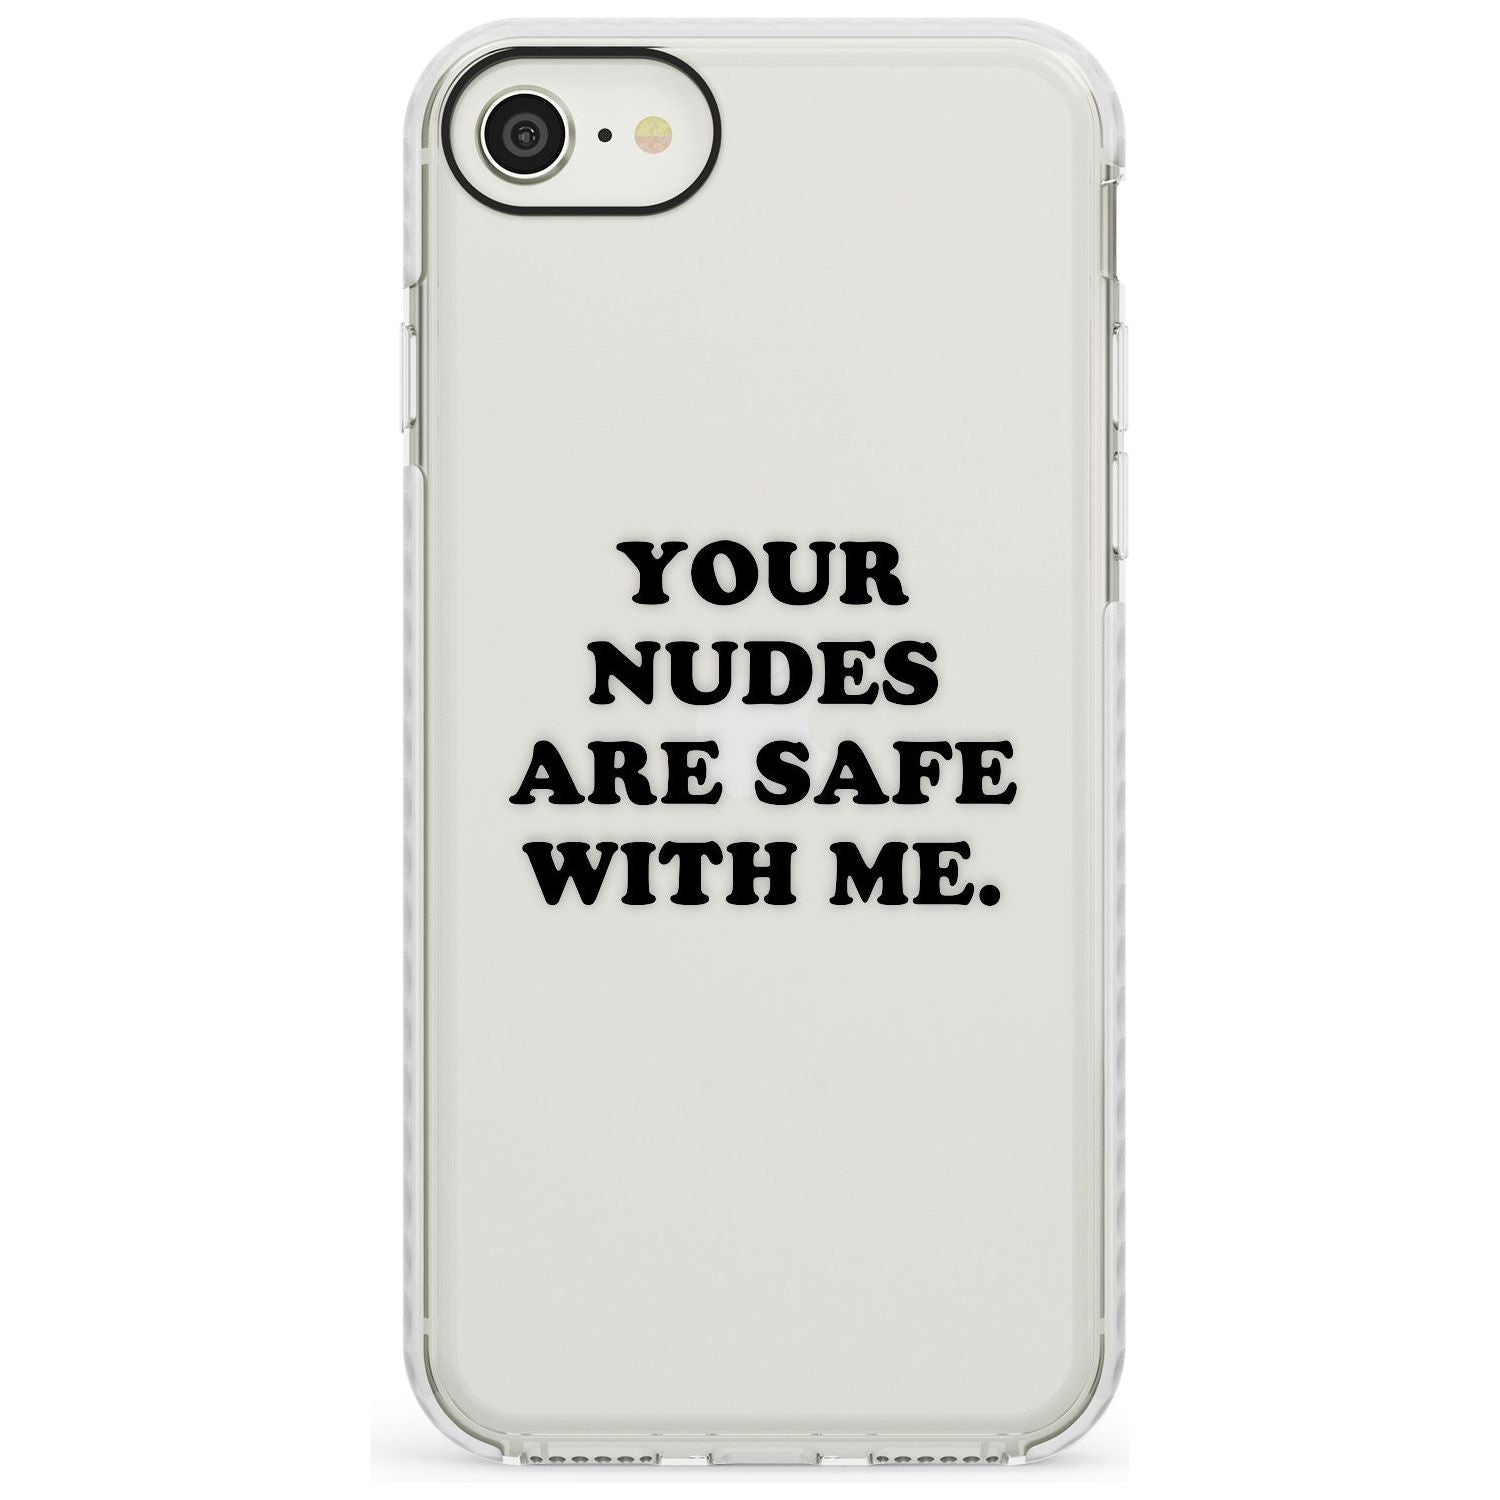 Your nudes are safe with me... BLACK Impact Phone Case for iPhone SE 8 7 Plus